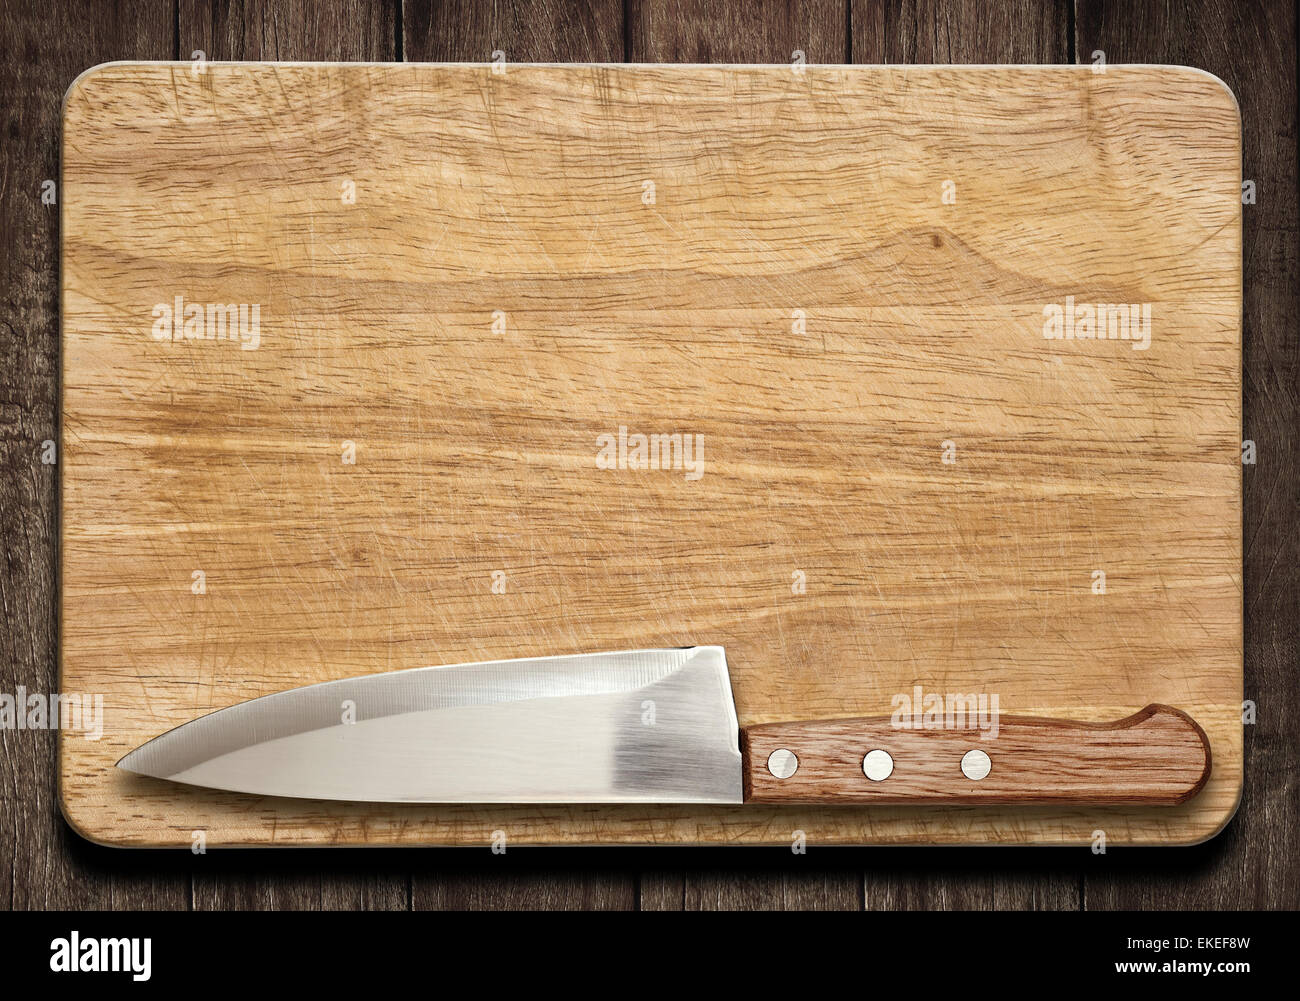 Cutting board and knife on old wood table Stock Photo